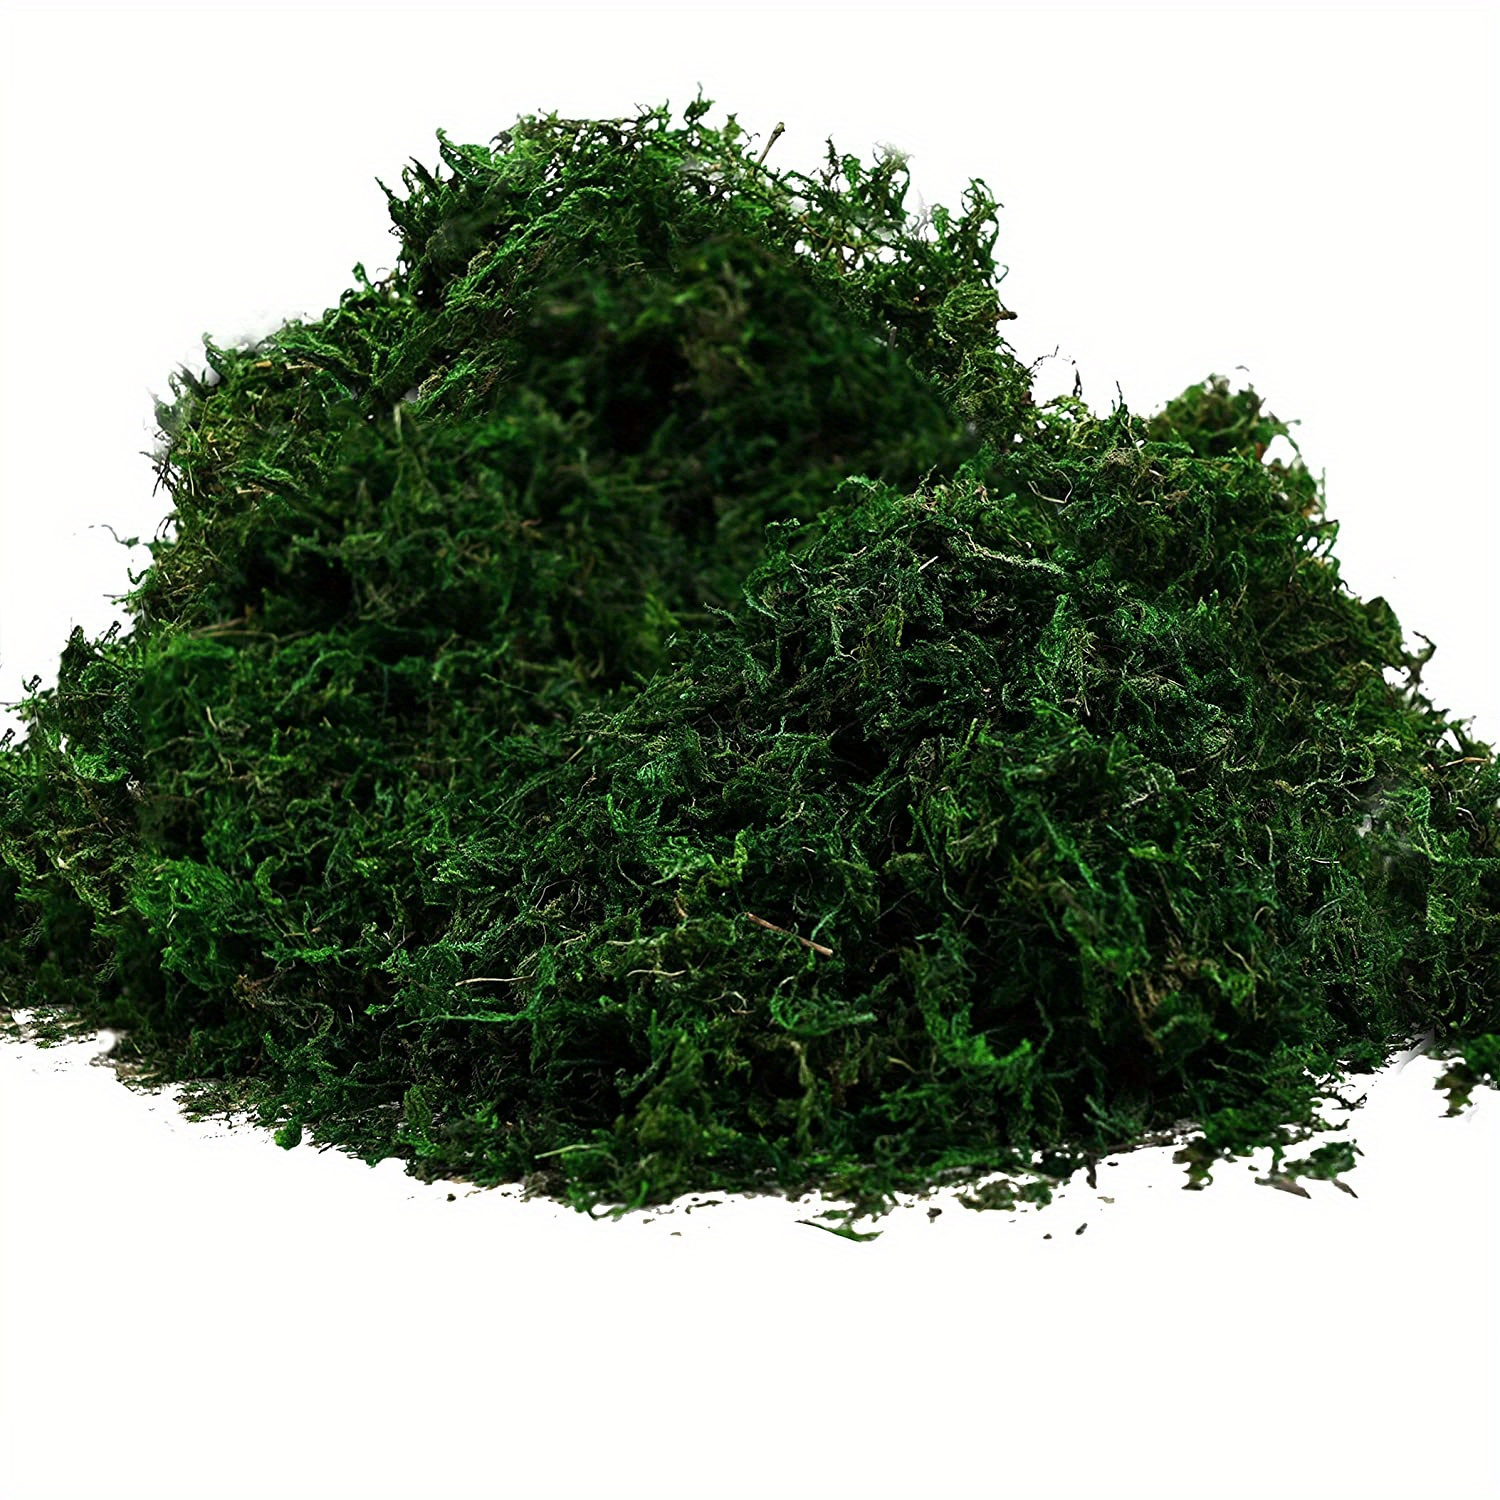 0.88 Oz Artificial Fake Moss, Green Reindeer Moss Lawn For  Plants,simulation Moss Turf Landscaping, Biomimetic Artificial Moss Micro  Landscape Layout, Lawn Bonsai, Potted Plant Pavement Decoration,craft Decorative  Moss Decor, Dried Moss